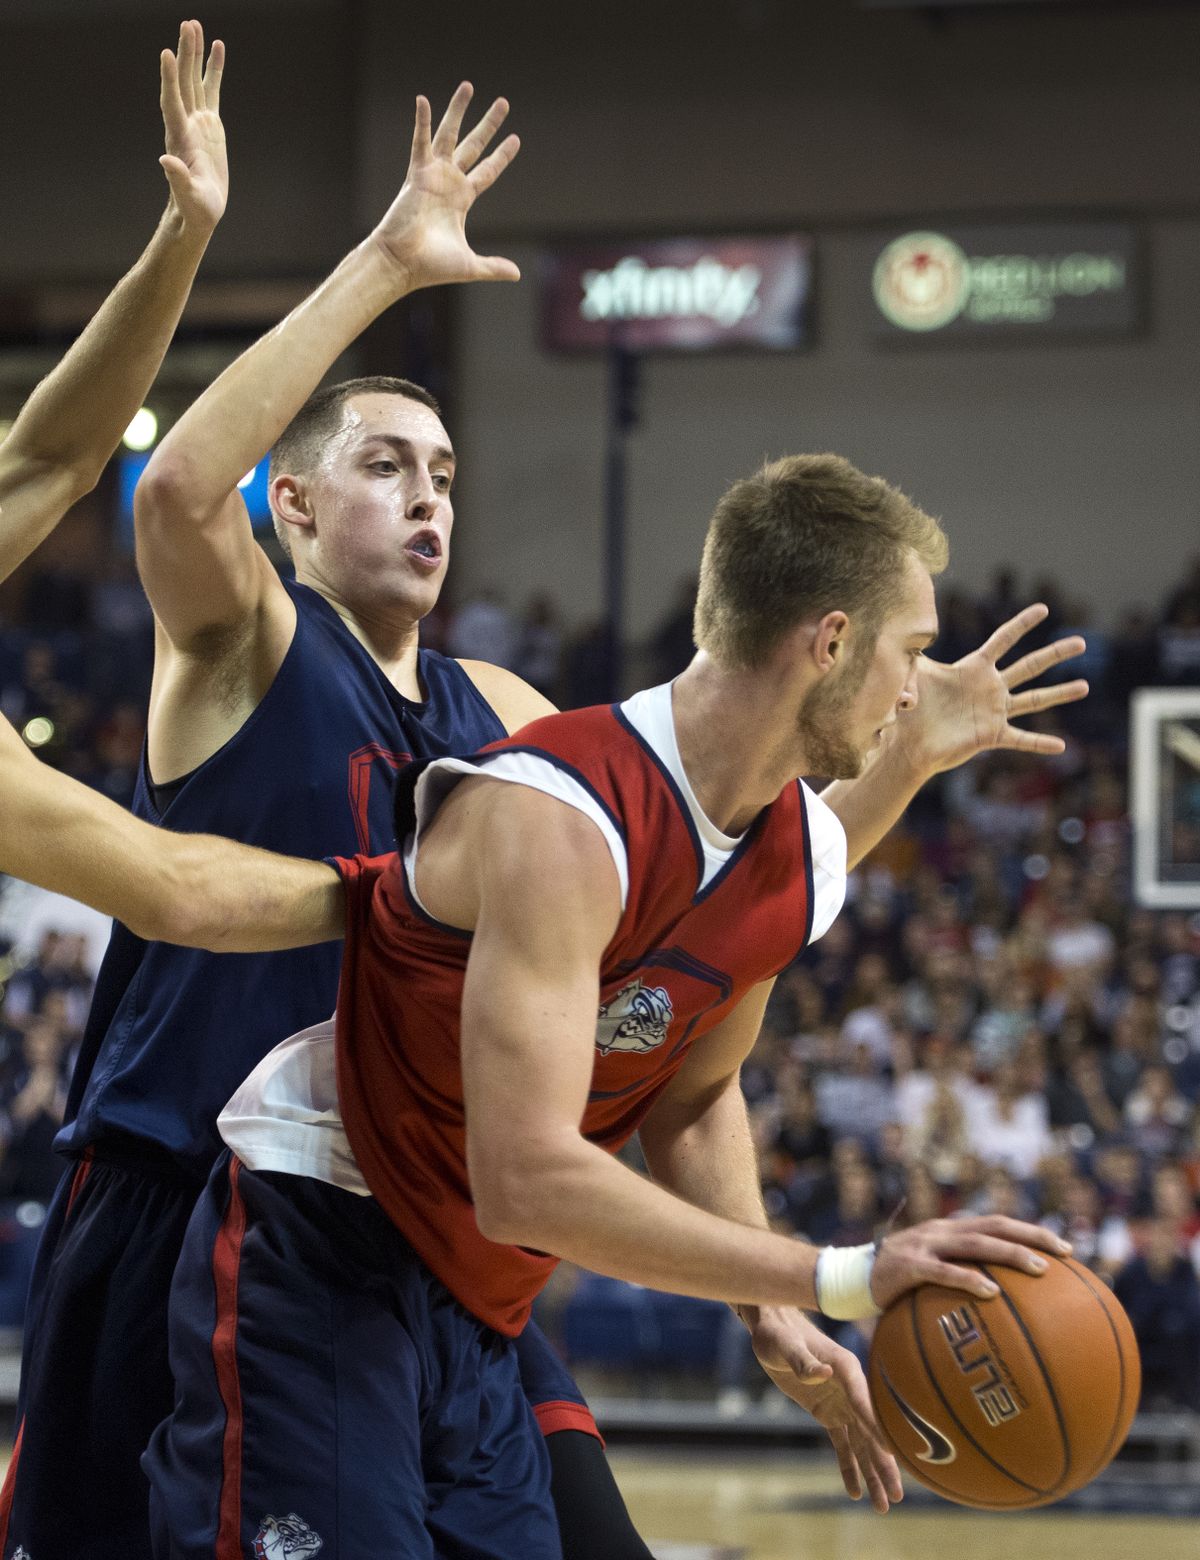 For GU players like Kyle Wiltjer, left, and Domantas Sabonis, scrimmages give the Bulldogs a chance to size each other up. (Dan Pelle)